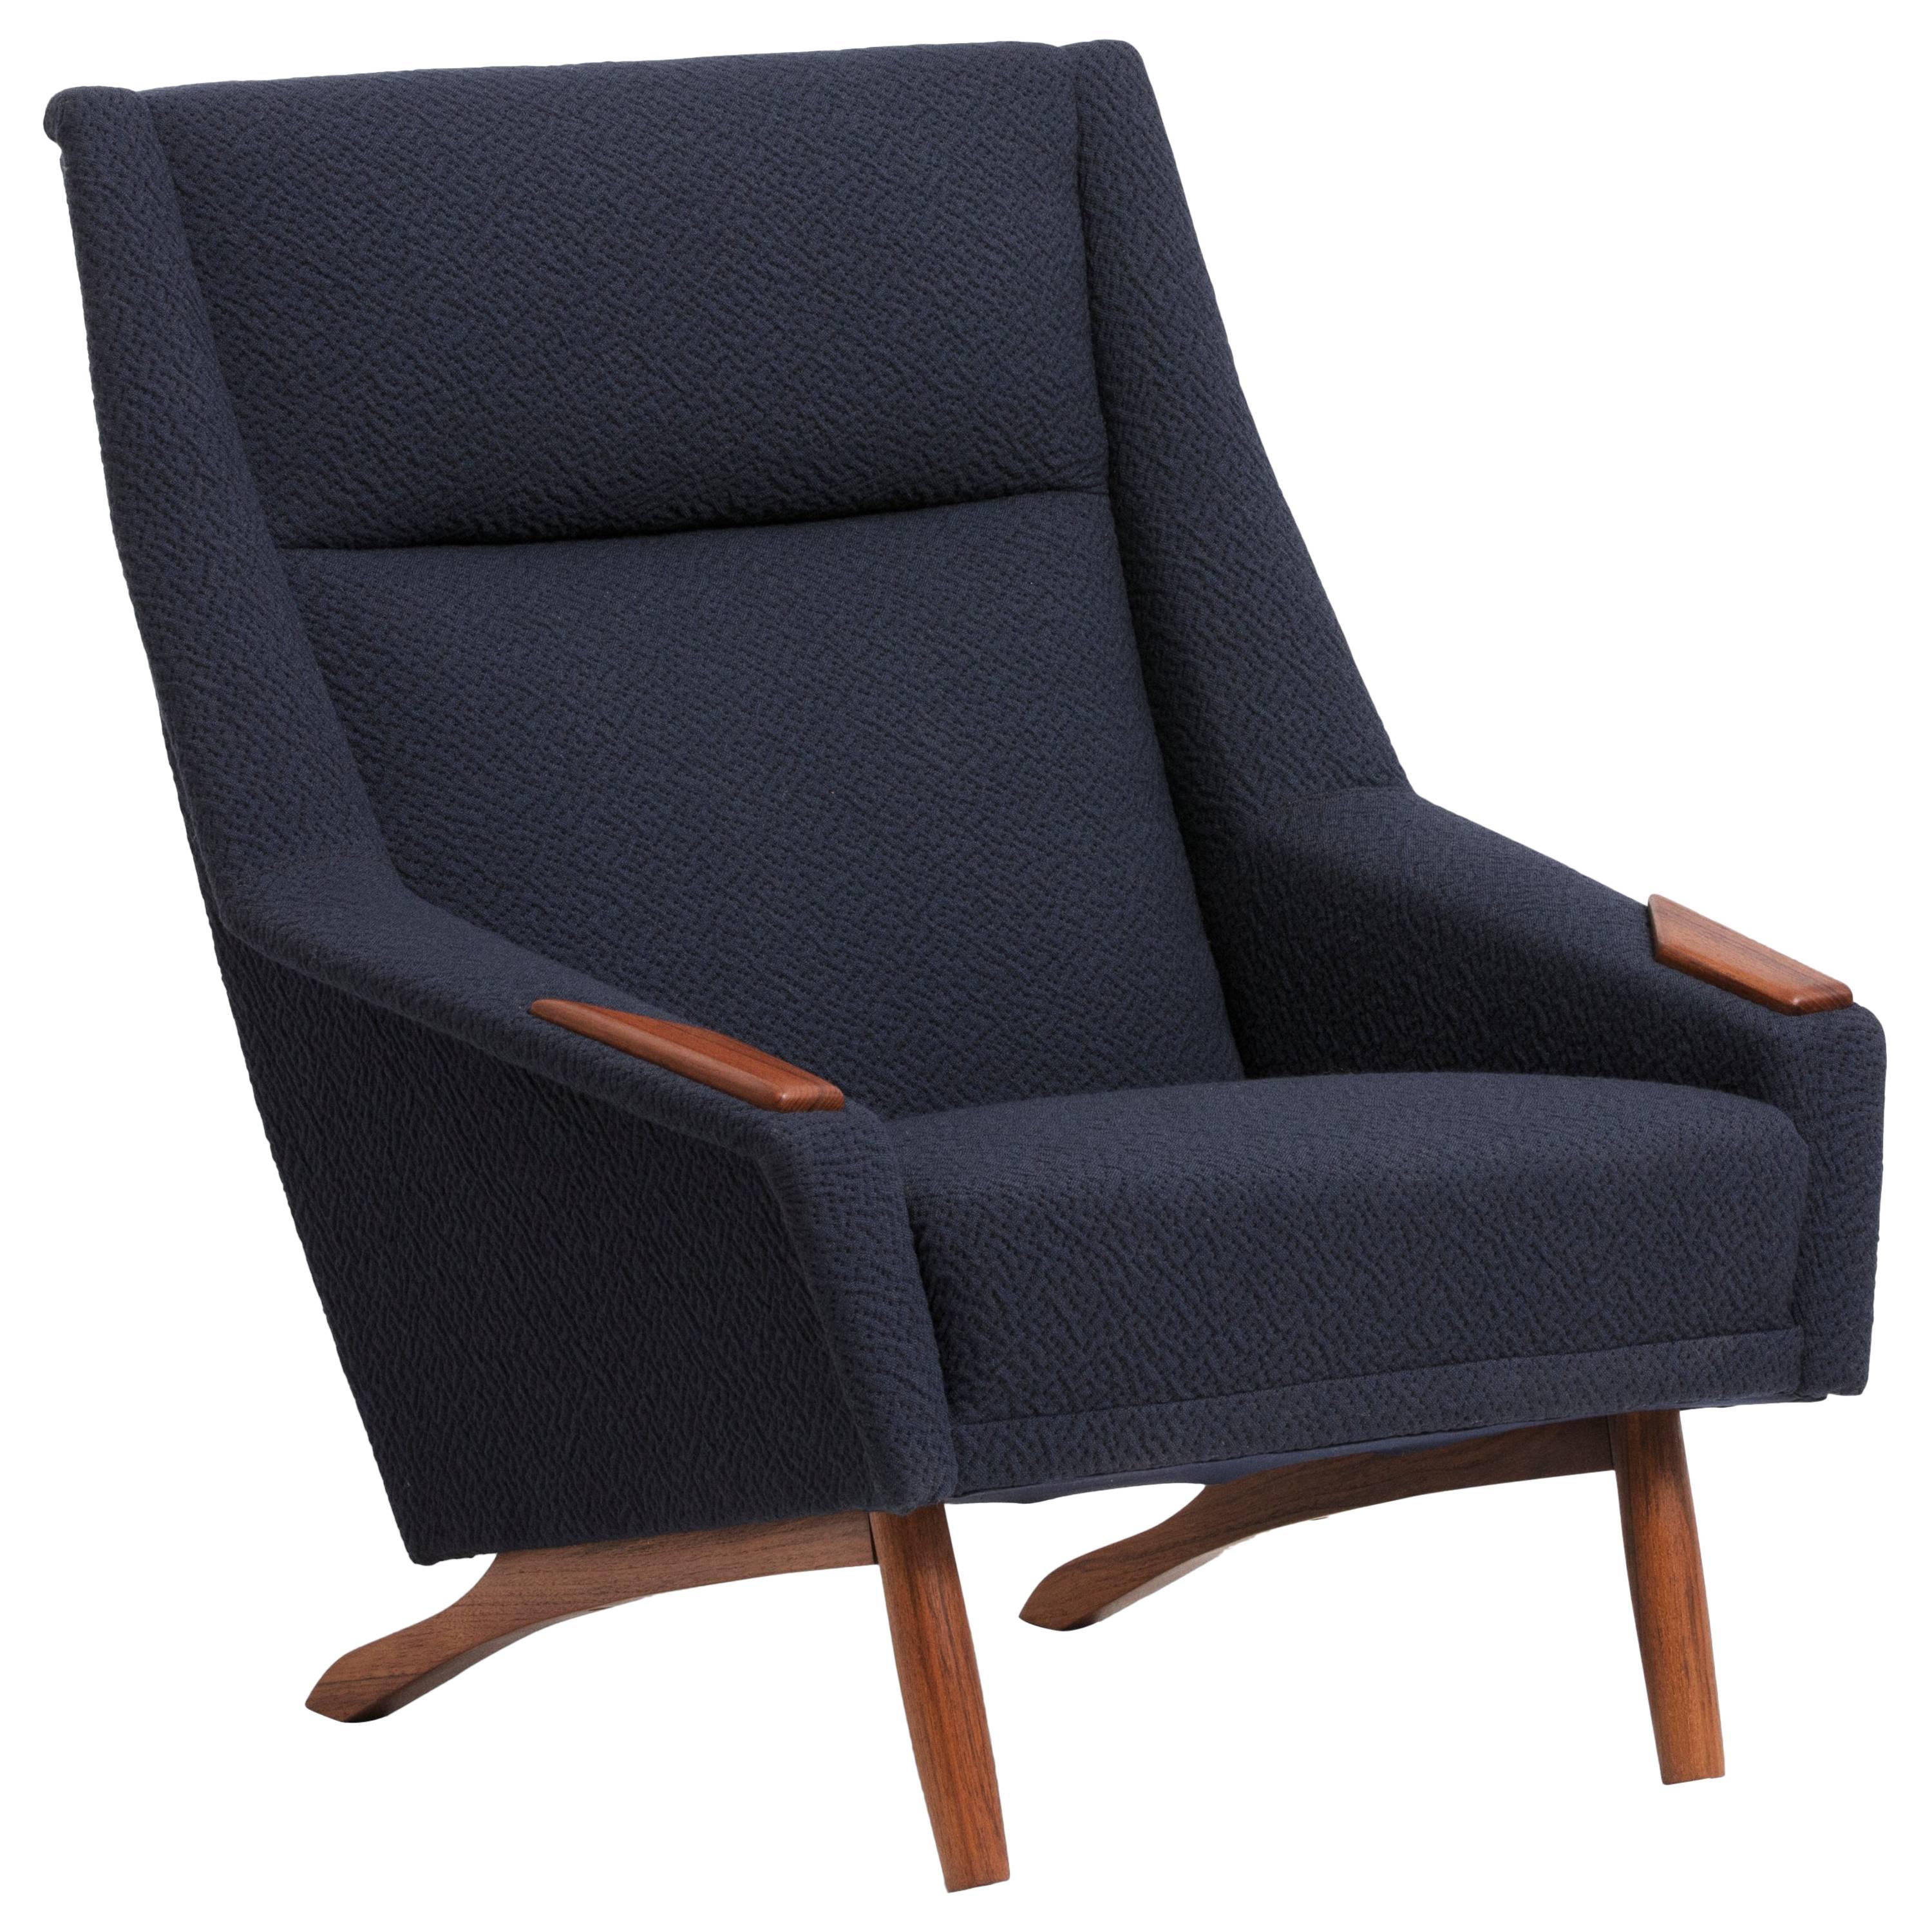 Danish Produced Lounge Chair in Navy New Wool Upholstery by Kvadrat, 1960s For Sale